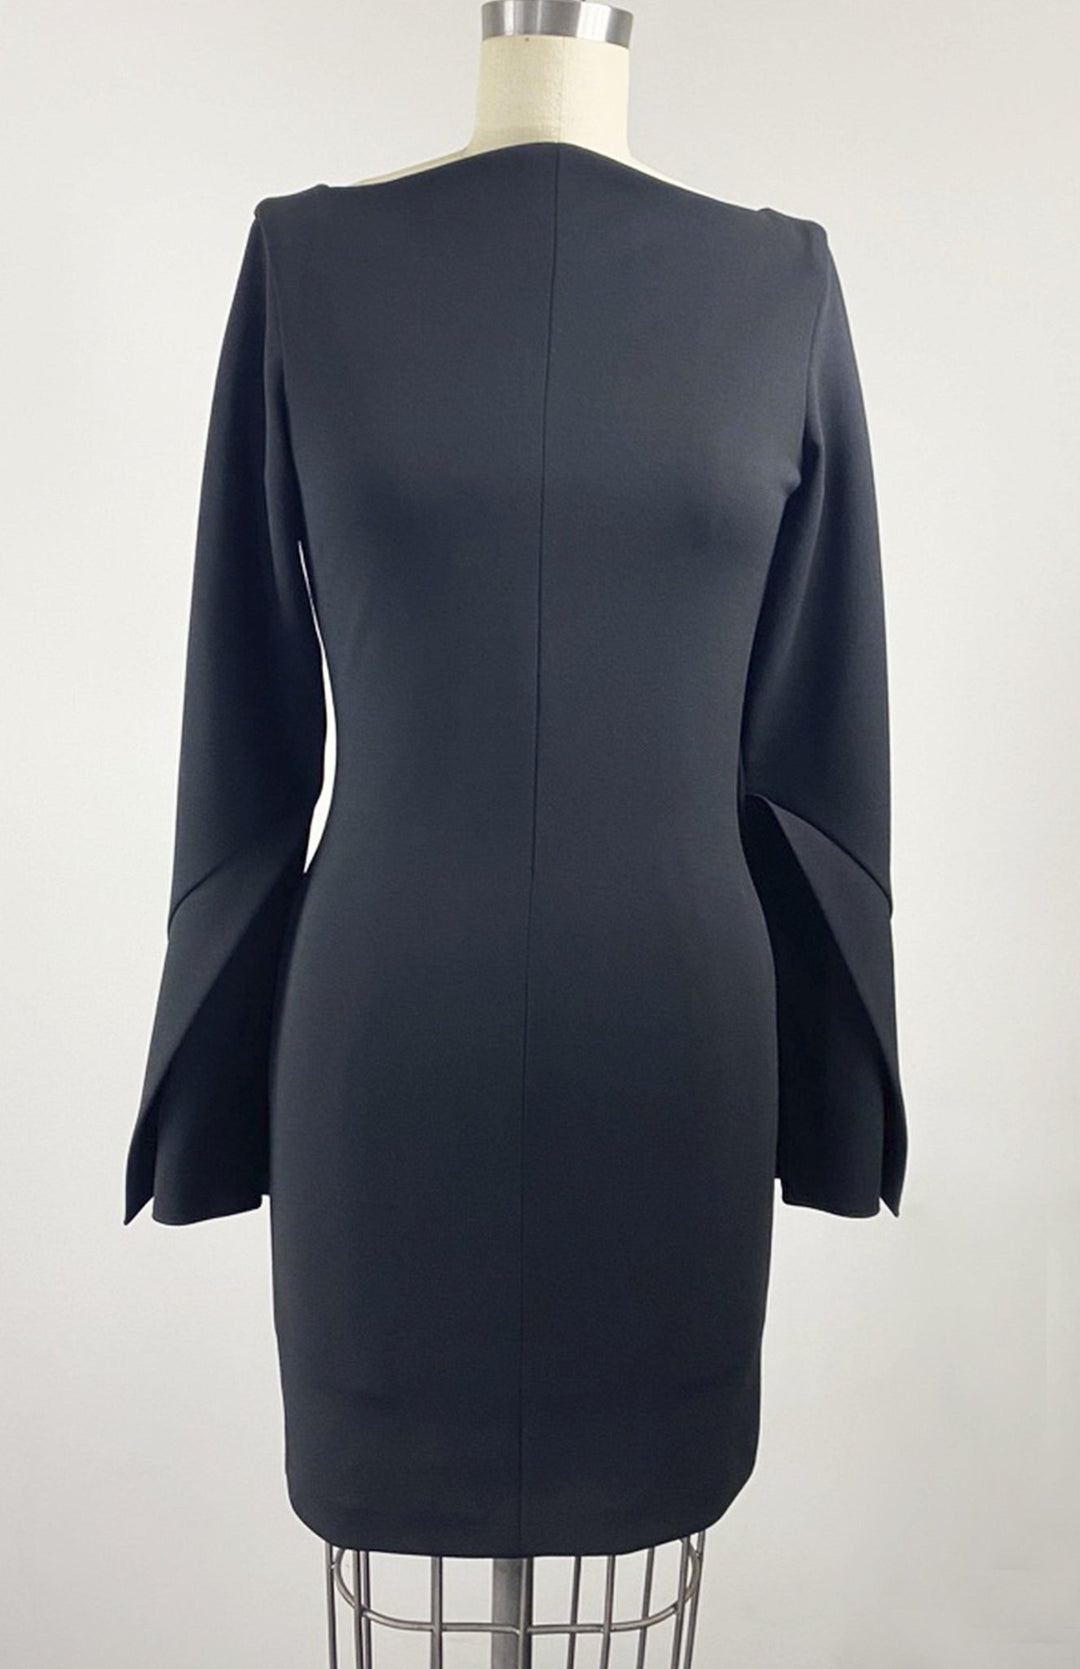 Perfect little black dress. Long sleeve short fitted dress, with high neck, long sleeves, made in stretch crepe.